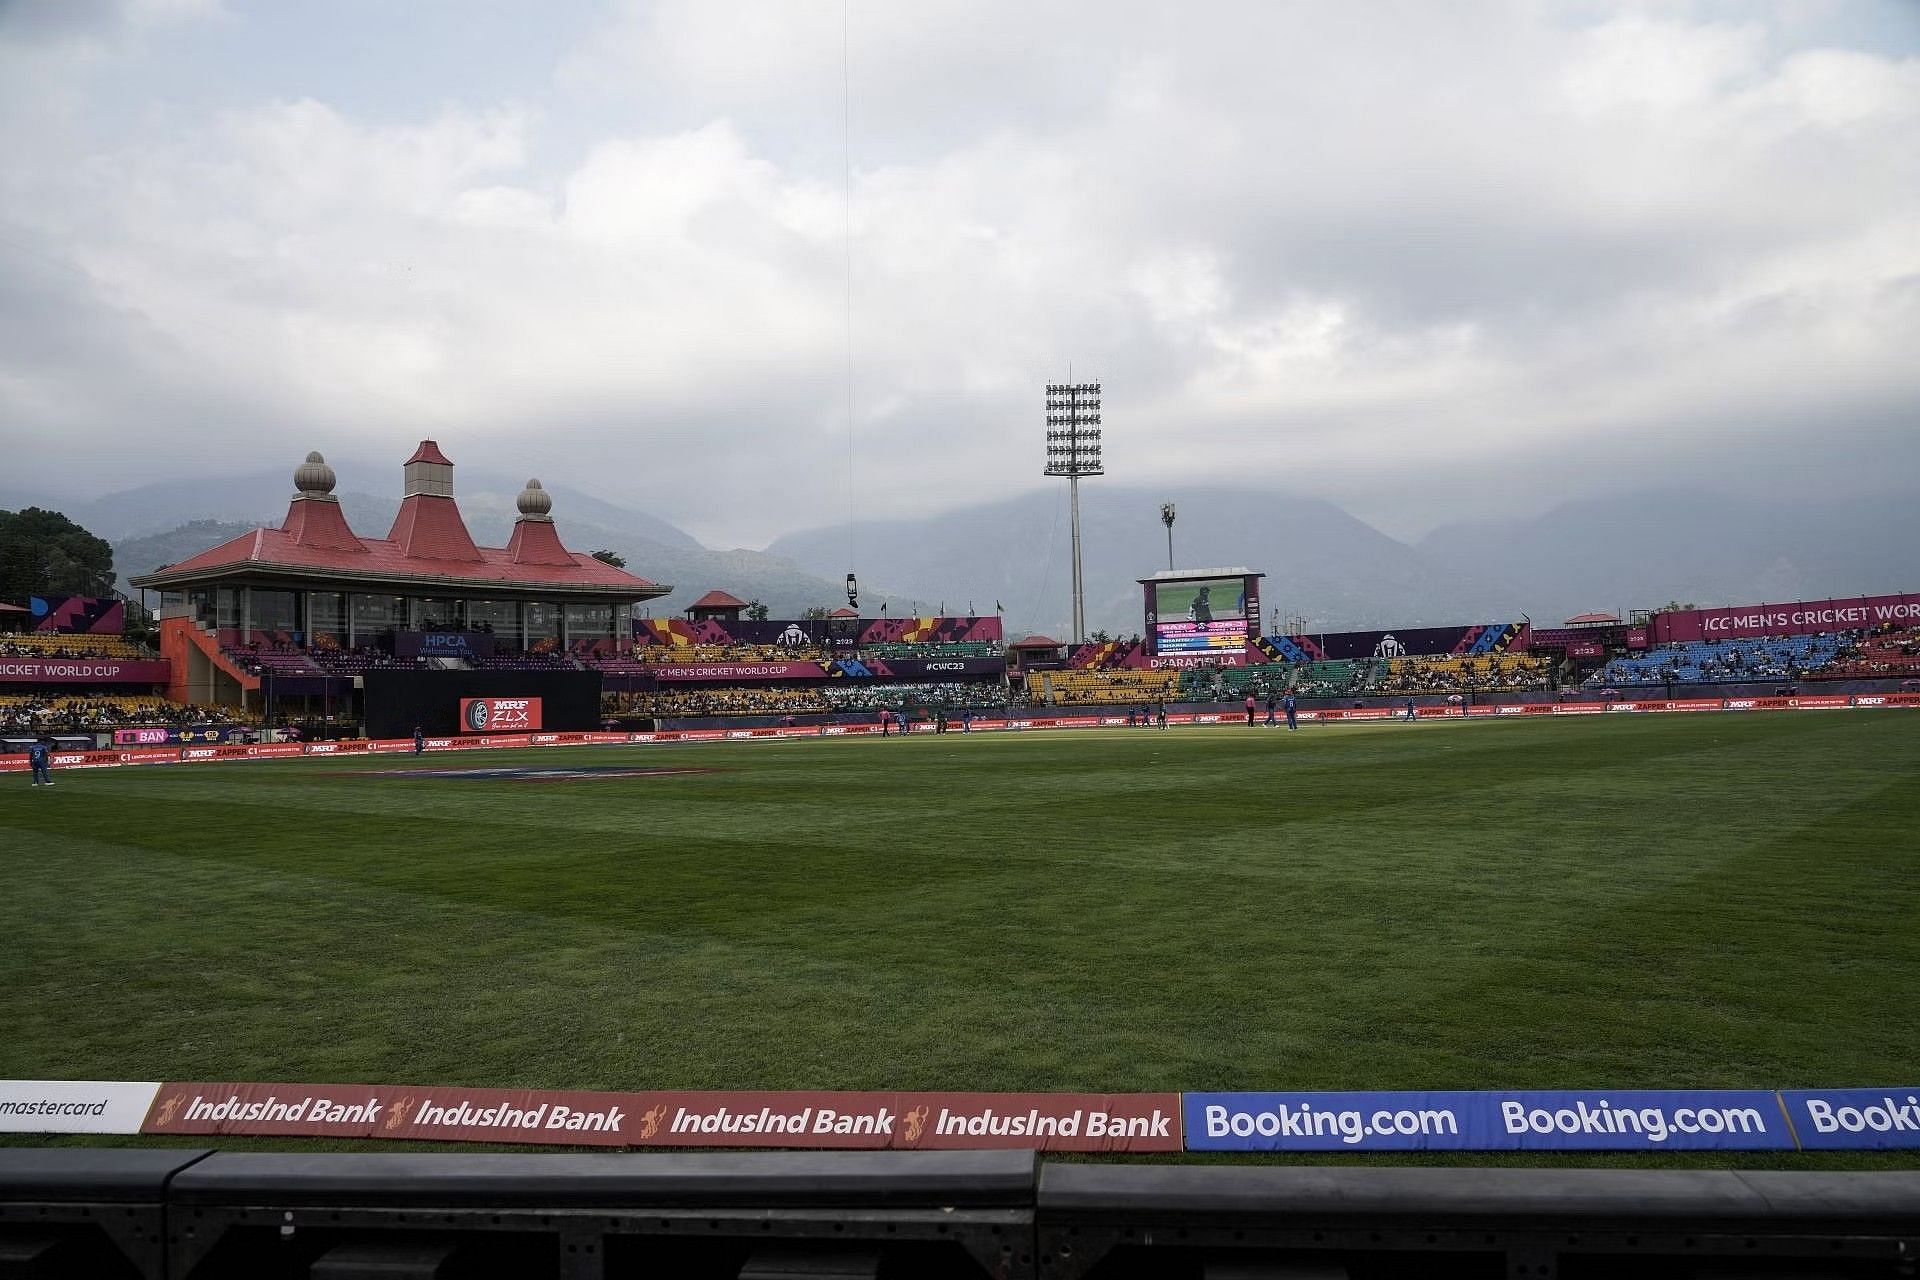 The HPCA Stadium in Dharamsala [Getty Images]